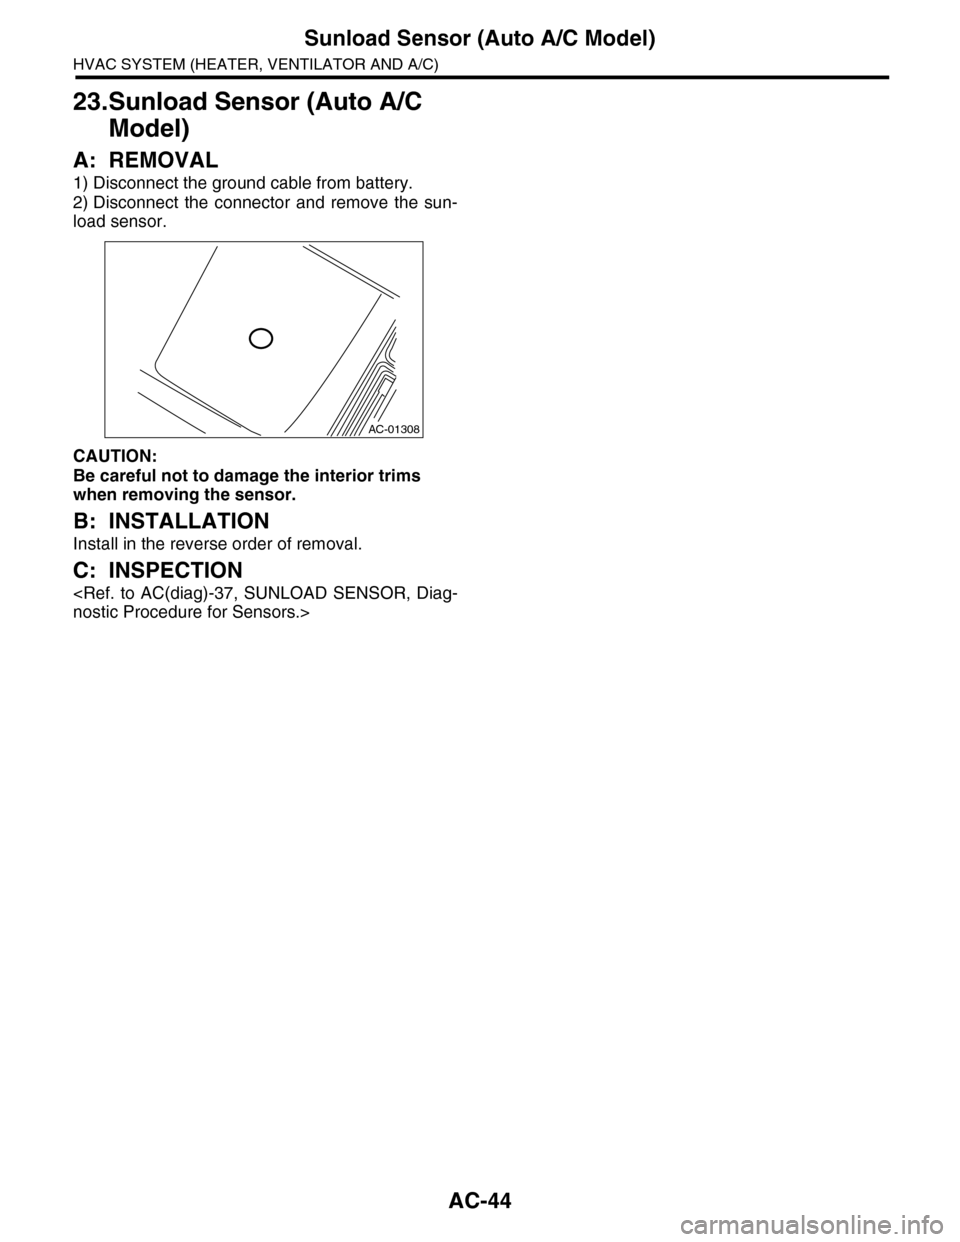 SUBARU TRIBECA 2009 1.G Service Manual PDF AC-44
Sunload Sensor (Auto A/C Model)
HVAC SYSTEM (HEATER, VENTILATOR AND A/C)
23.Sunload Sensor (Auto A/C 
Model)
A: REMOVAL
1) Disconnect the ground cable from battery.
2) Disconnect  the  connector